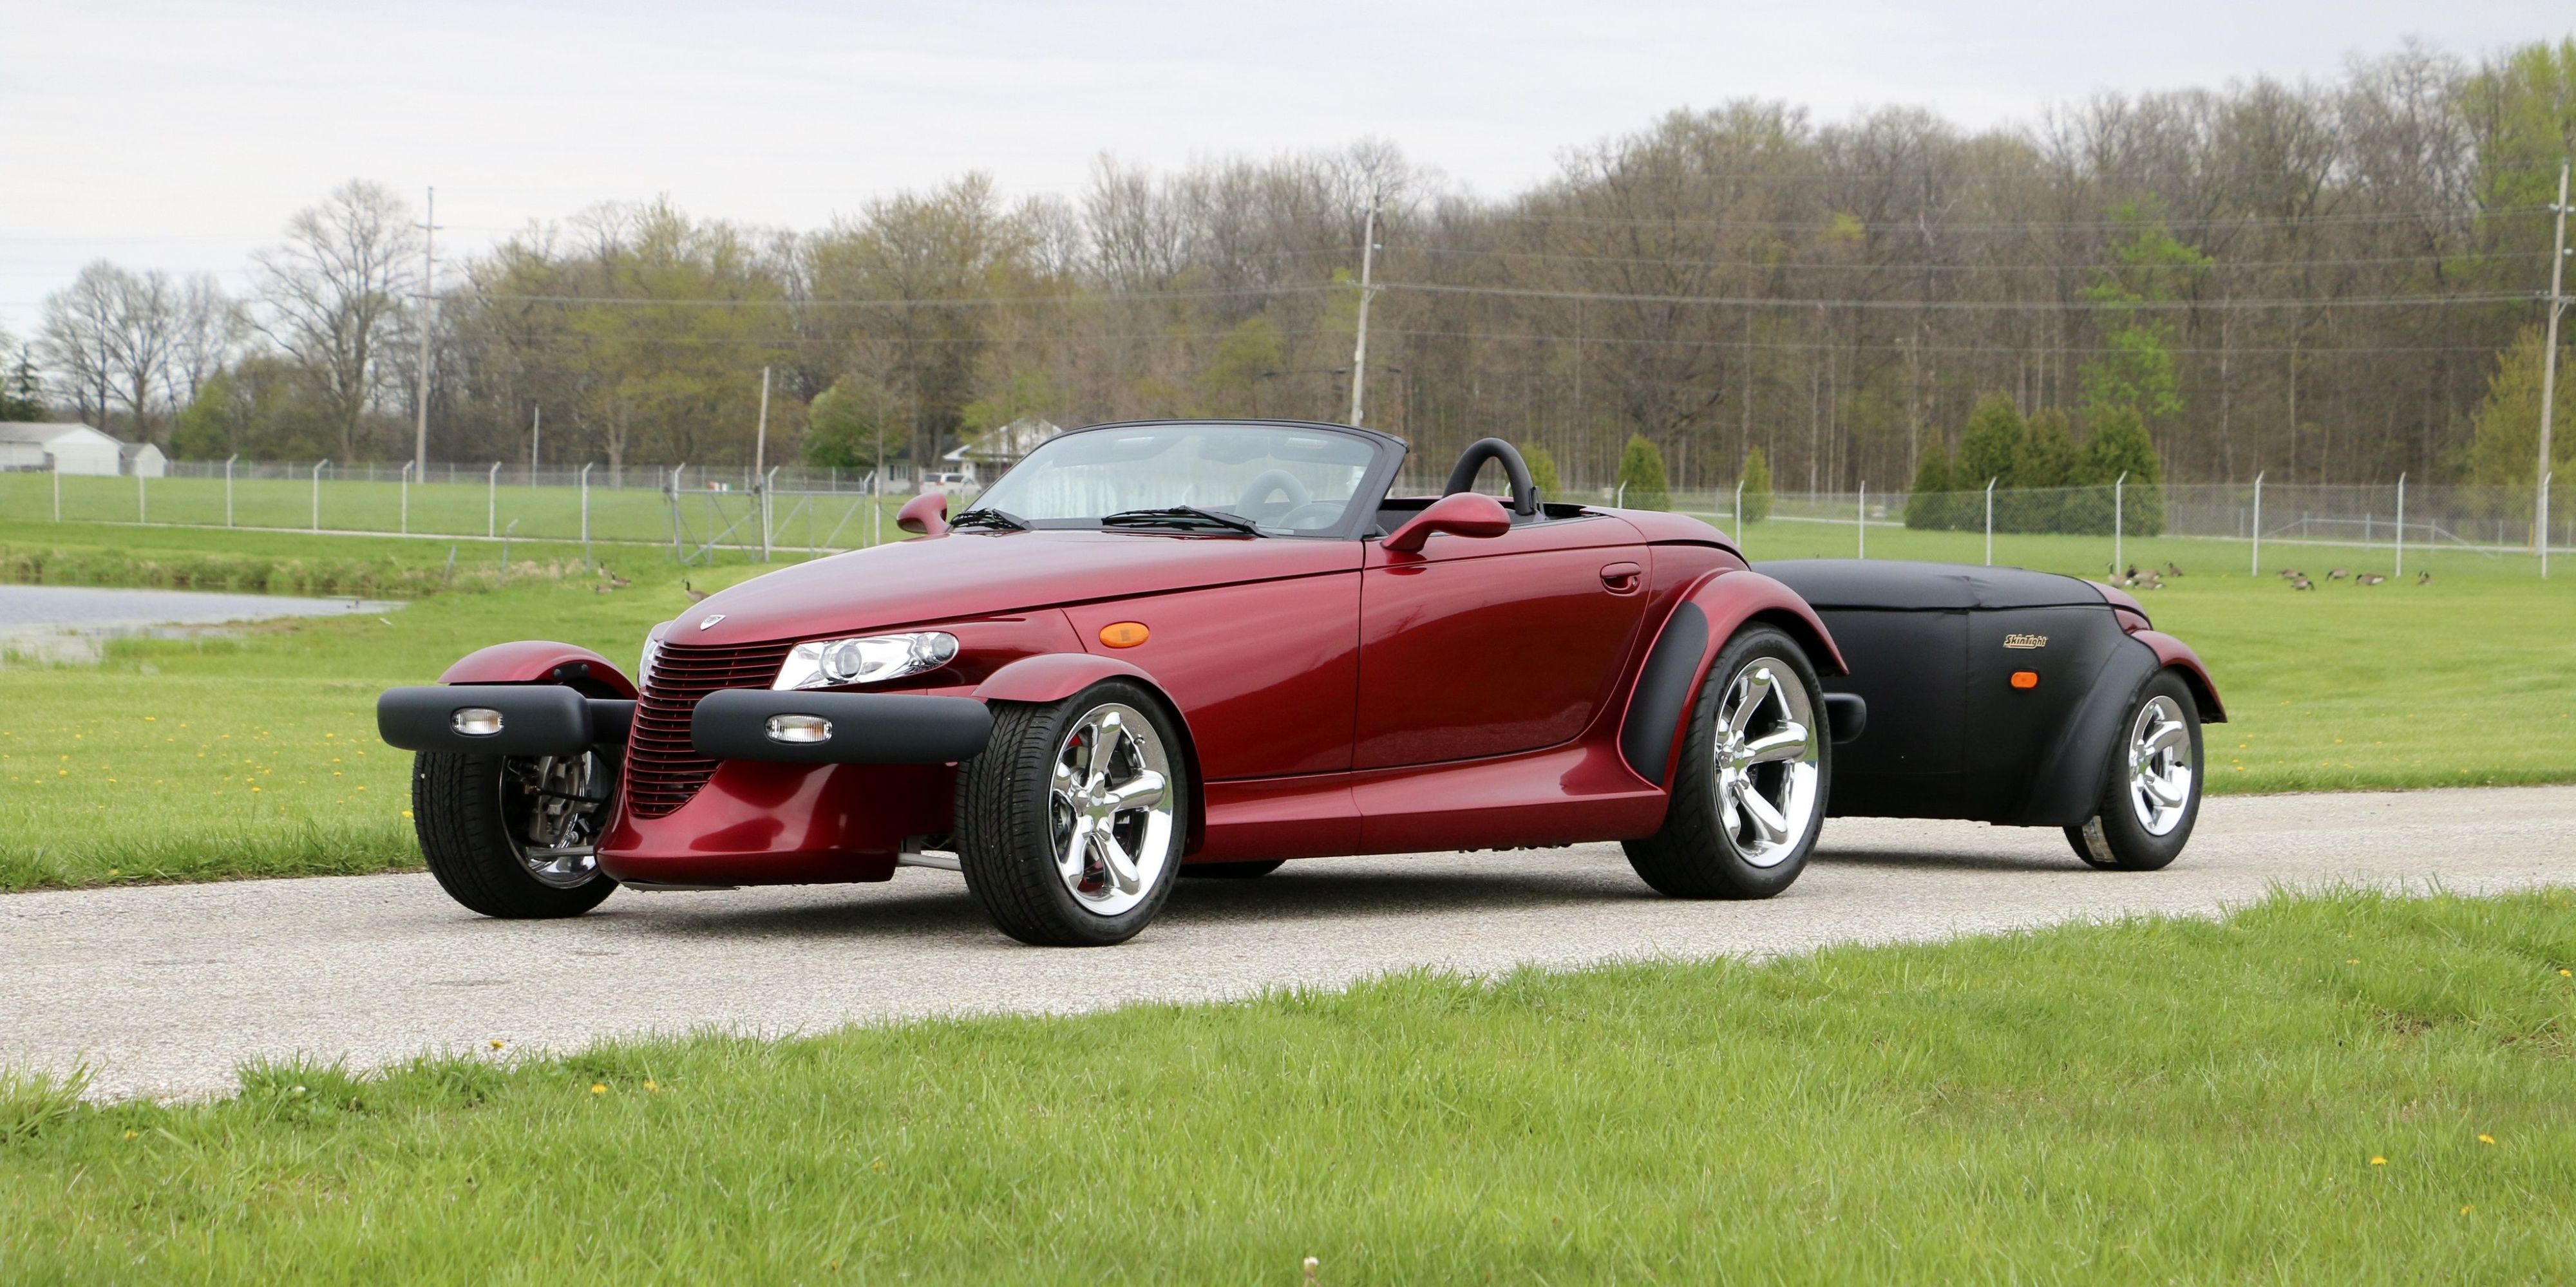 Plymouth prowler pictures